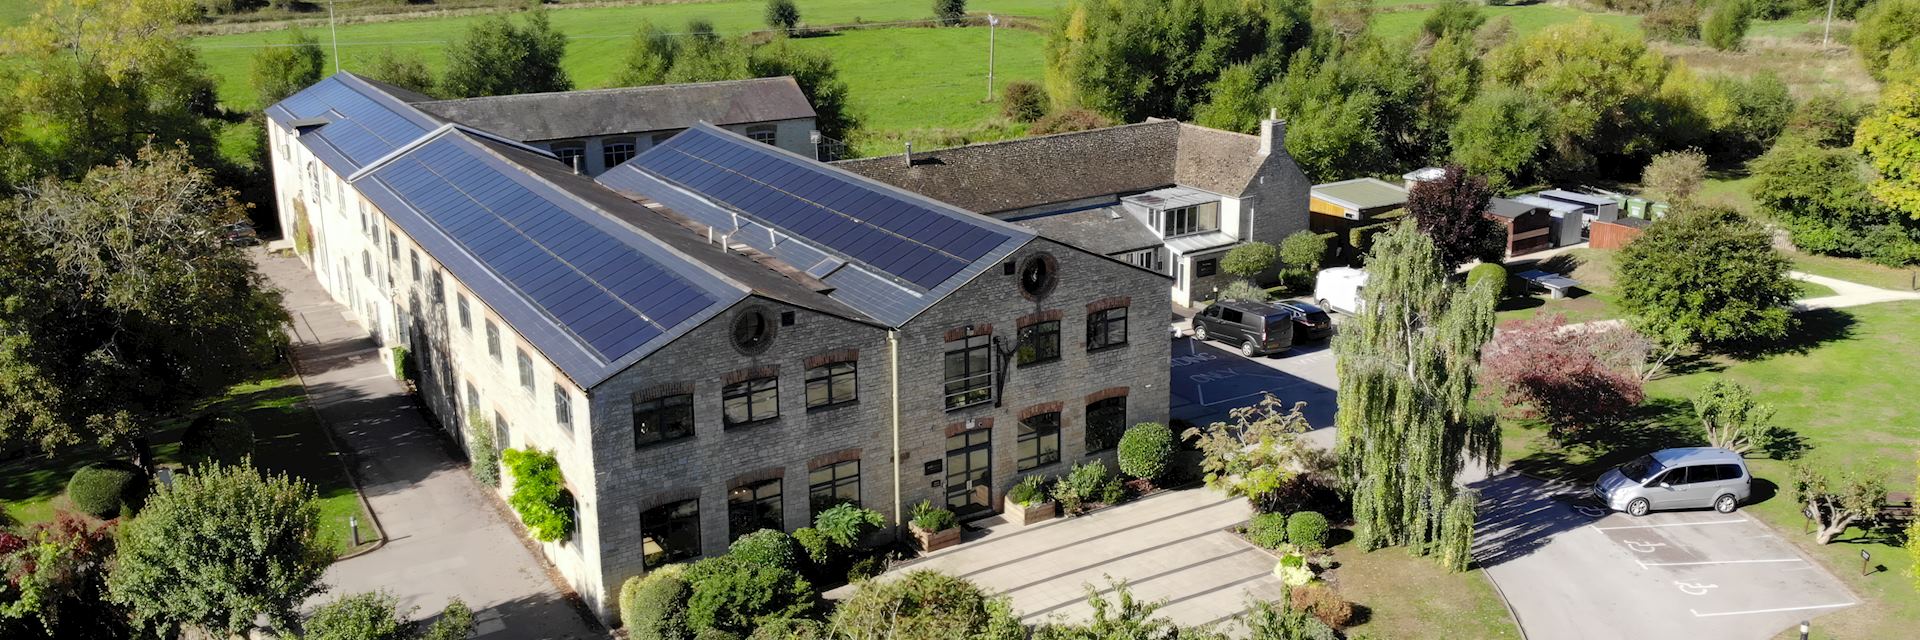 Solar panels at Old Mill offices, Witney